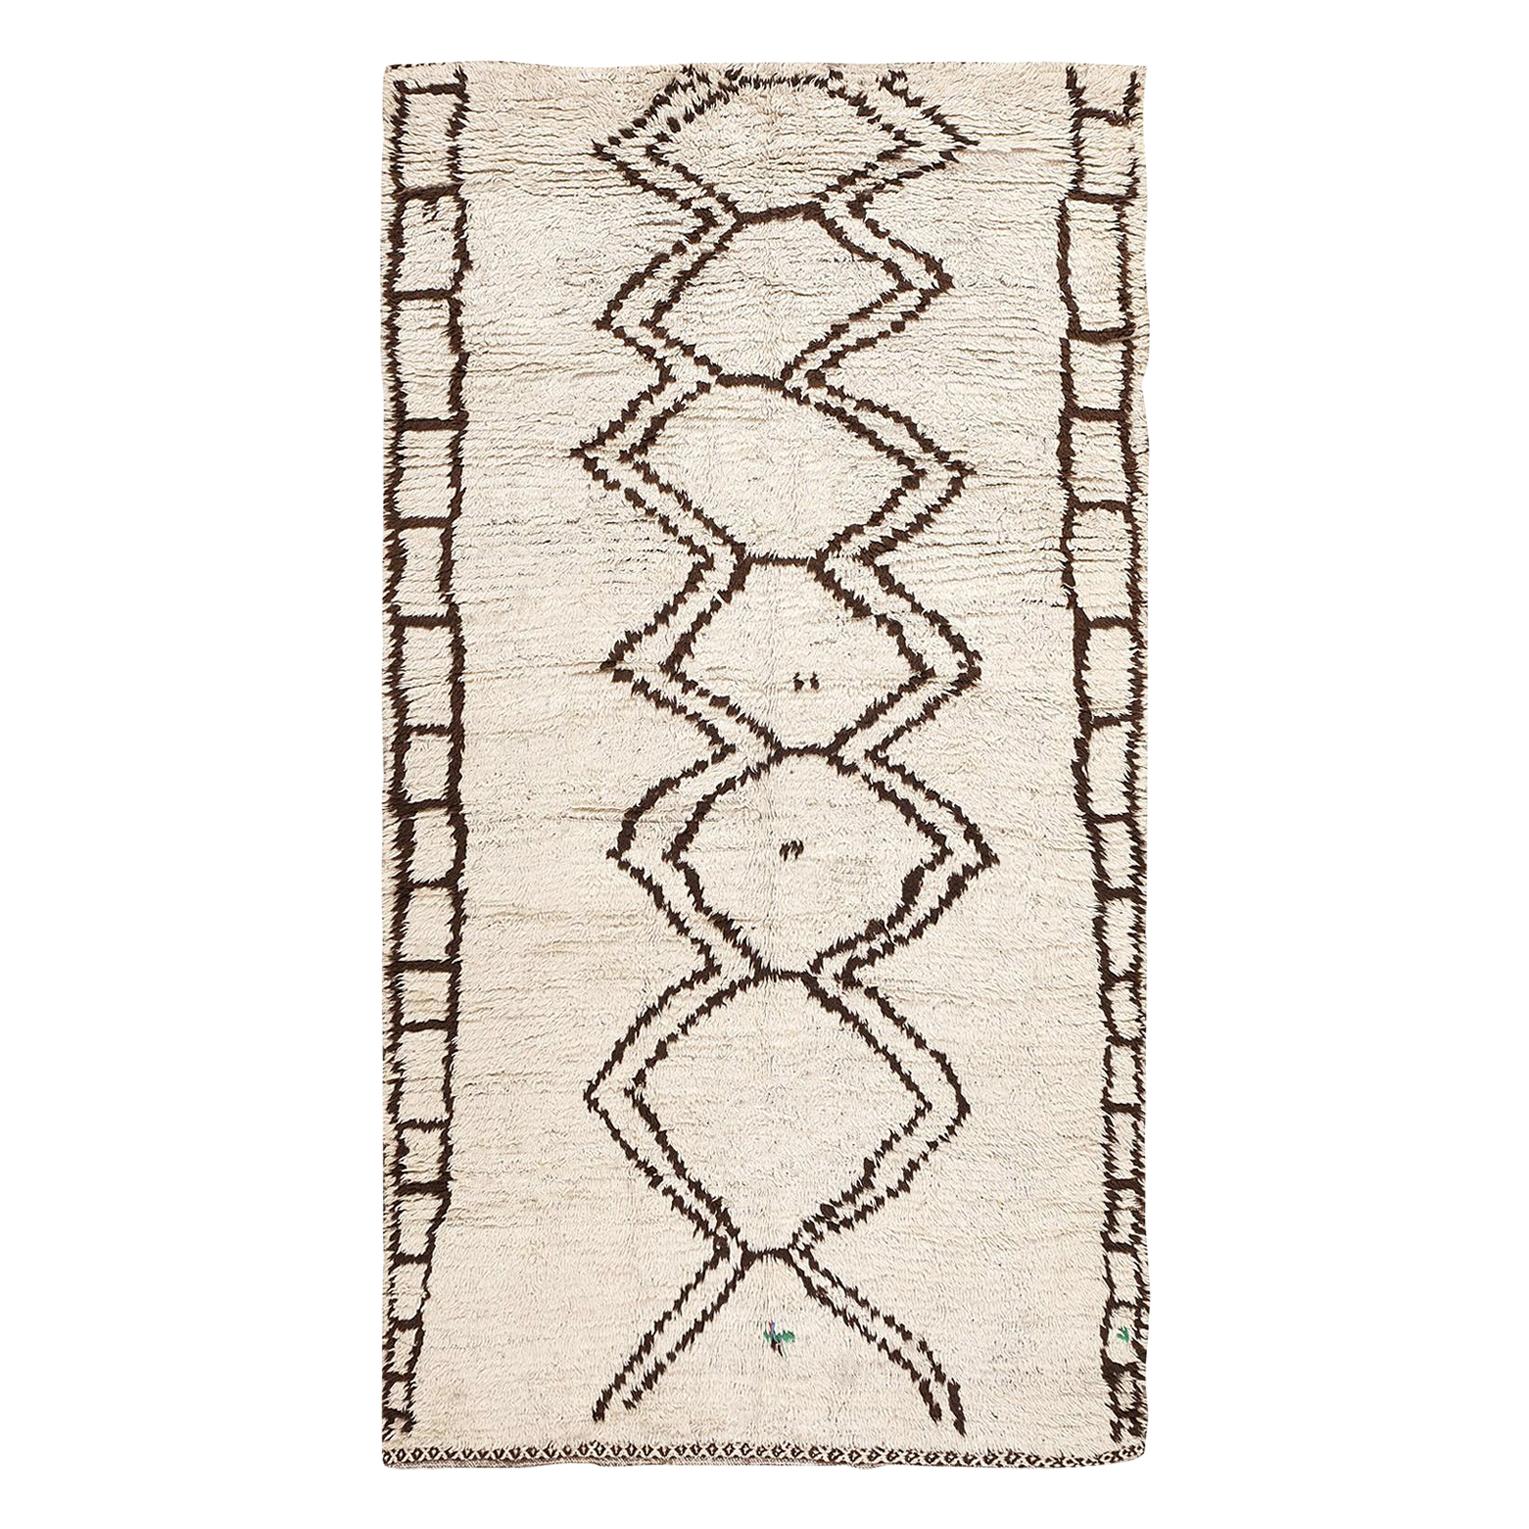 Nazmiyal Collection Moroccan Beni Ourain Berber Rug. Size: 4 ft 3 in x 8 ft